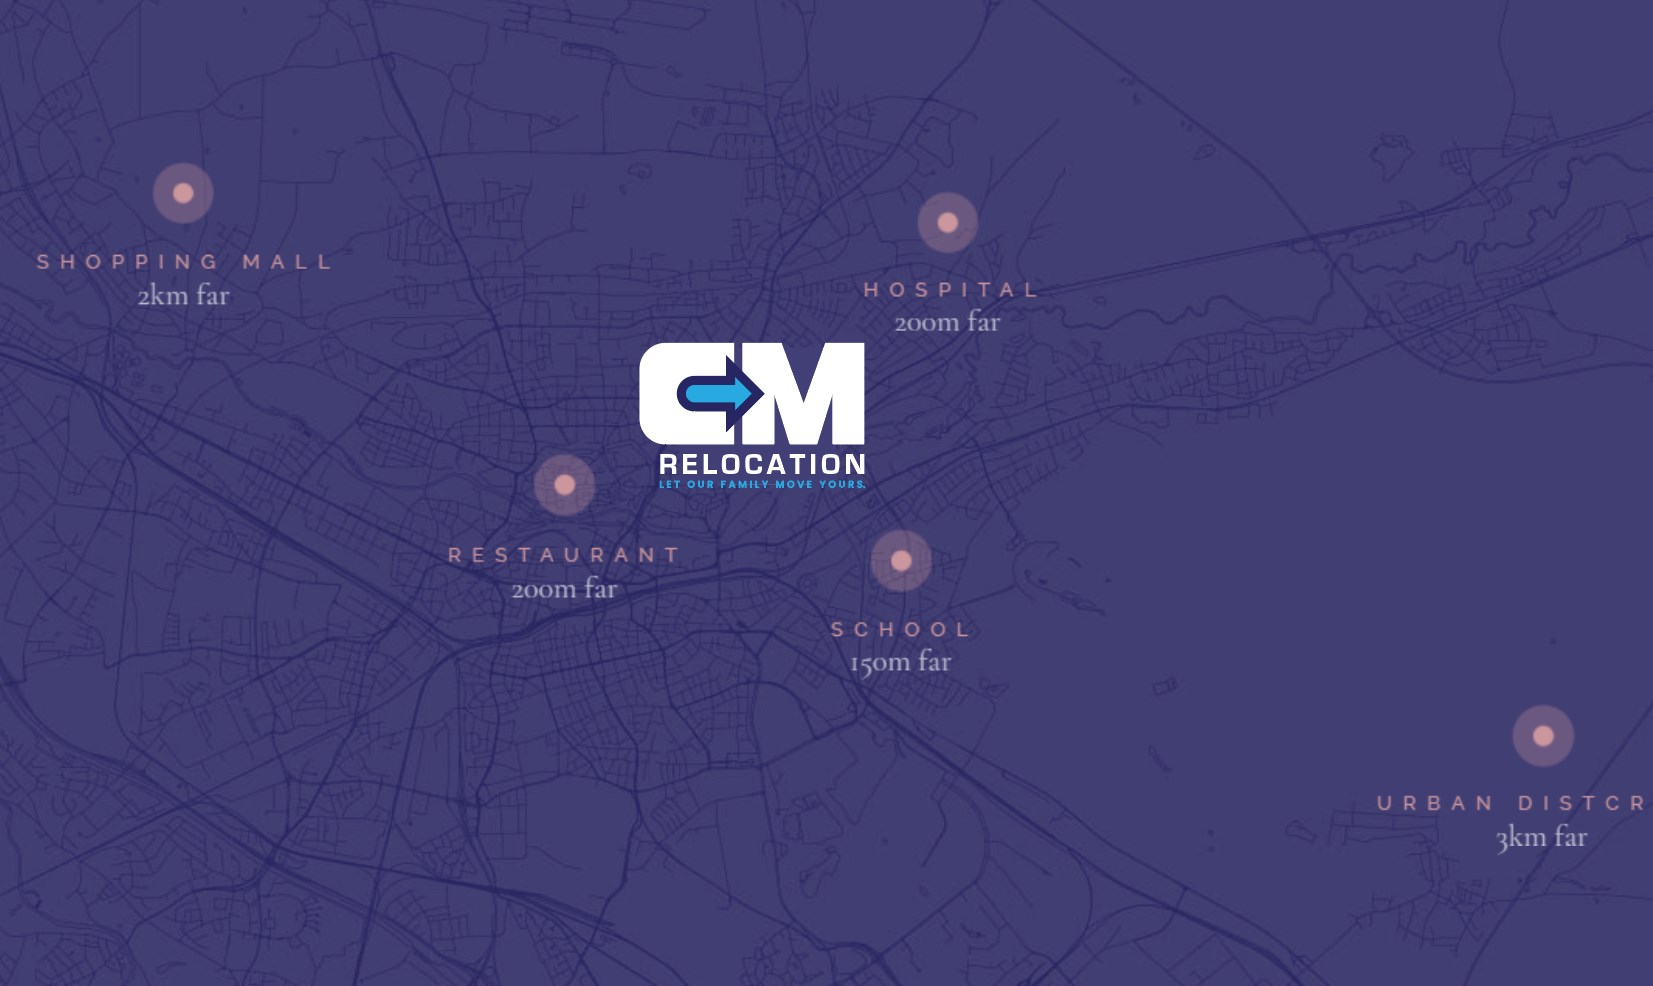 Relocation Services Singapore | Overseas Relocation Services | CM Relocation